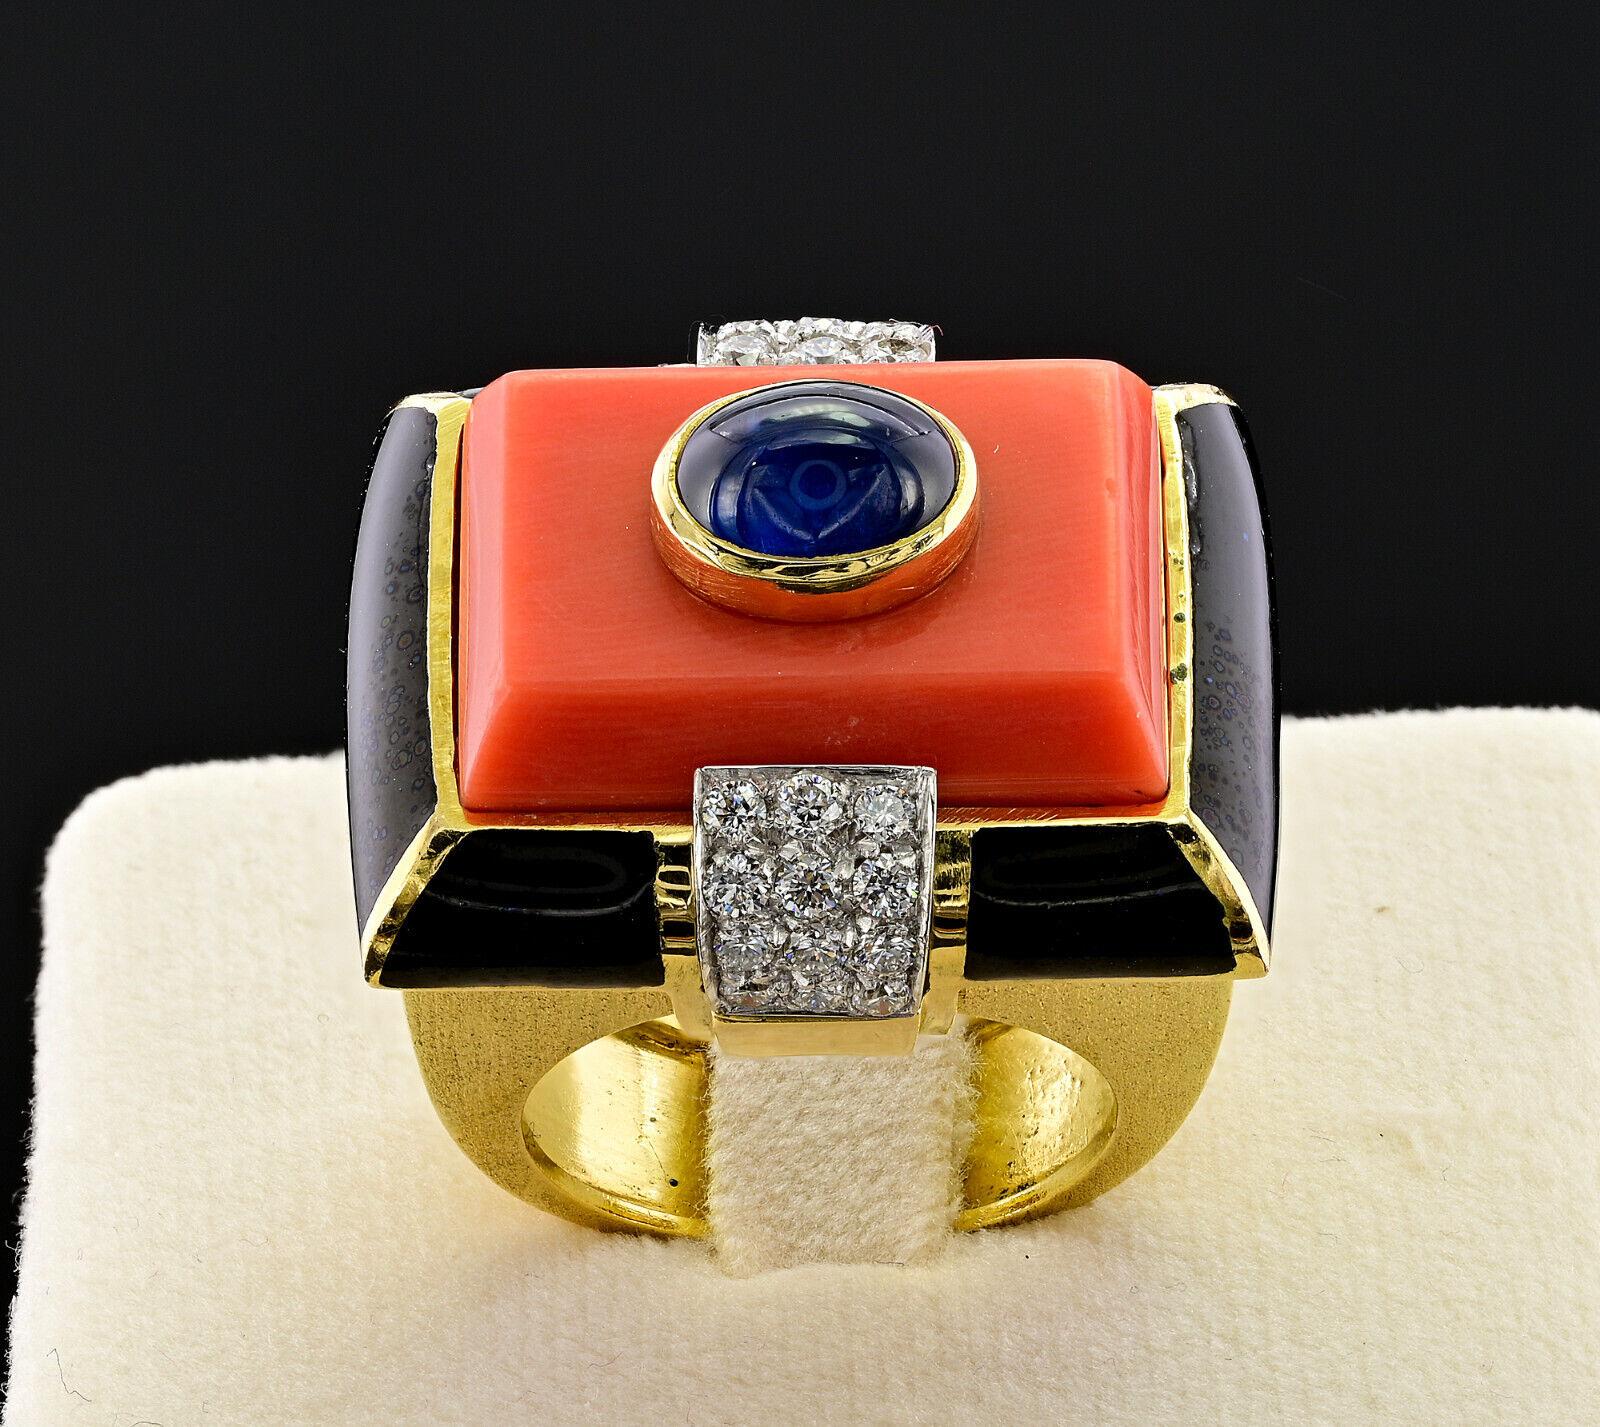 David Webb 18k Yellow Gold, Diamond, Enamel, Coral & Cabochon Sapphire Cocktail Ring Circa 1970s Vintage

Here is your chance to purchase a beautiful and highly collectible designer cocktail ring.  

A breathtaking David Webb vintage ring, 1960